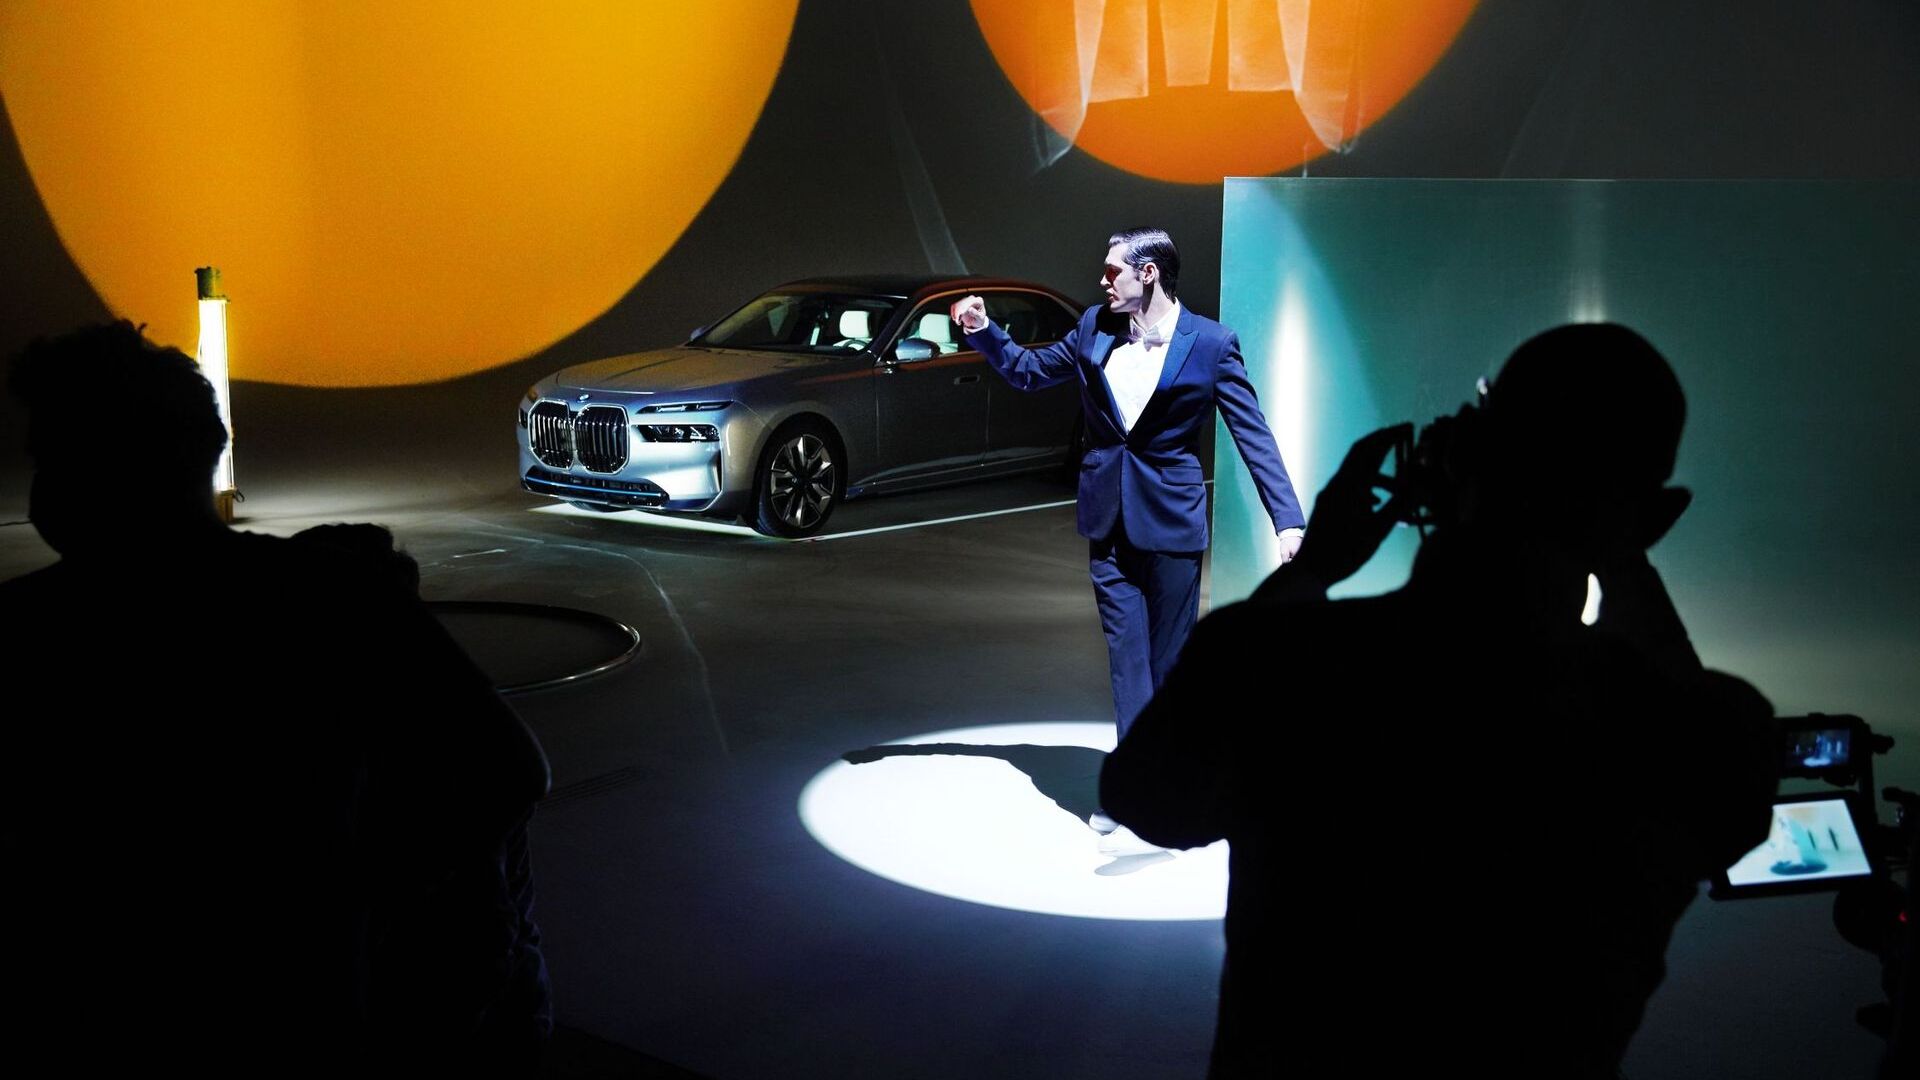 The BMW i7 has been reinterpreted by the British fashion photographer Nick Knight according to the criteria of Forwardism